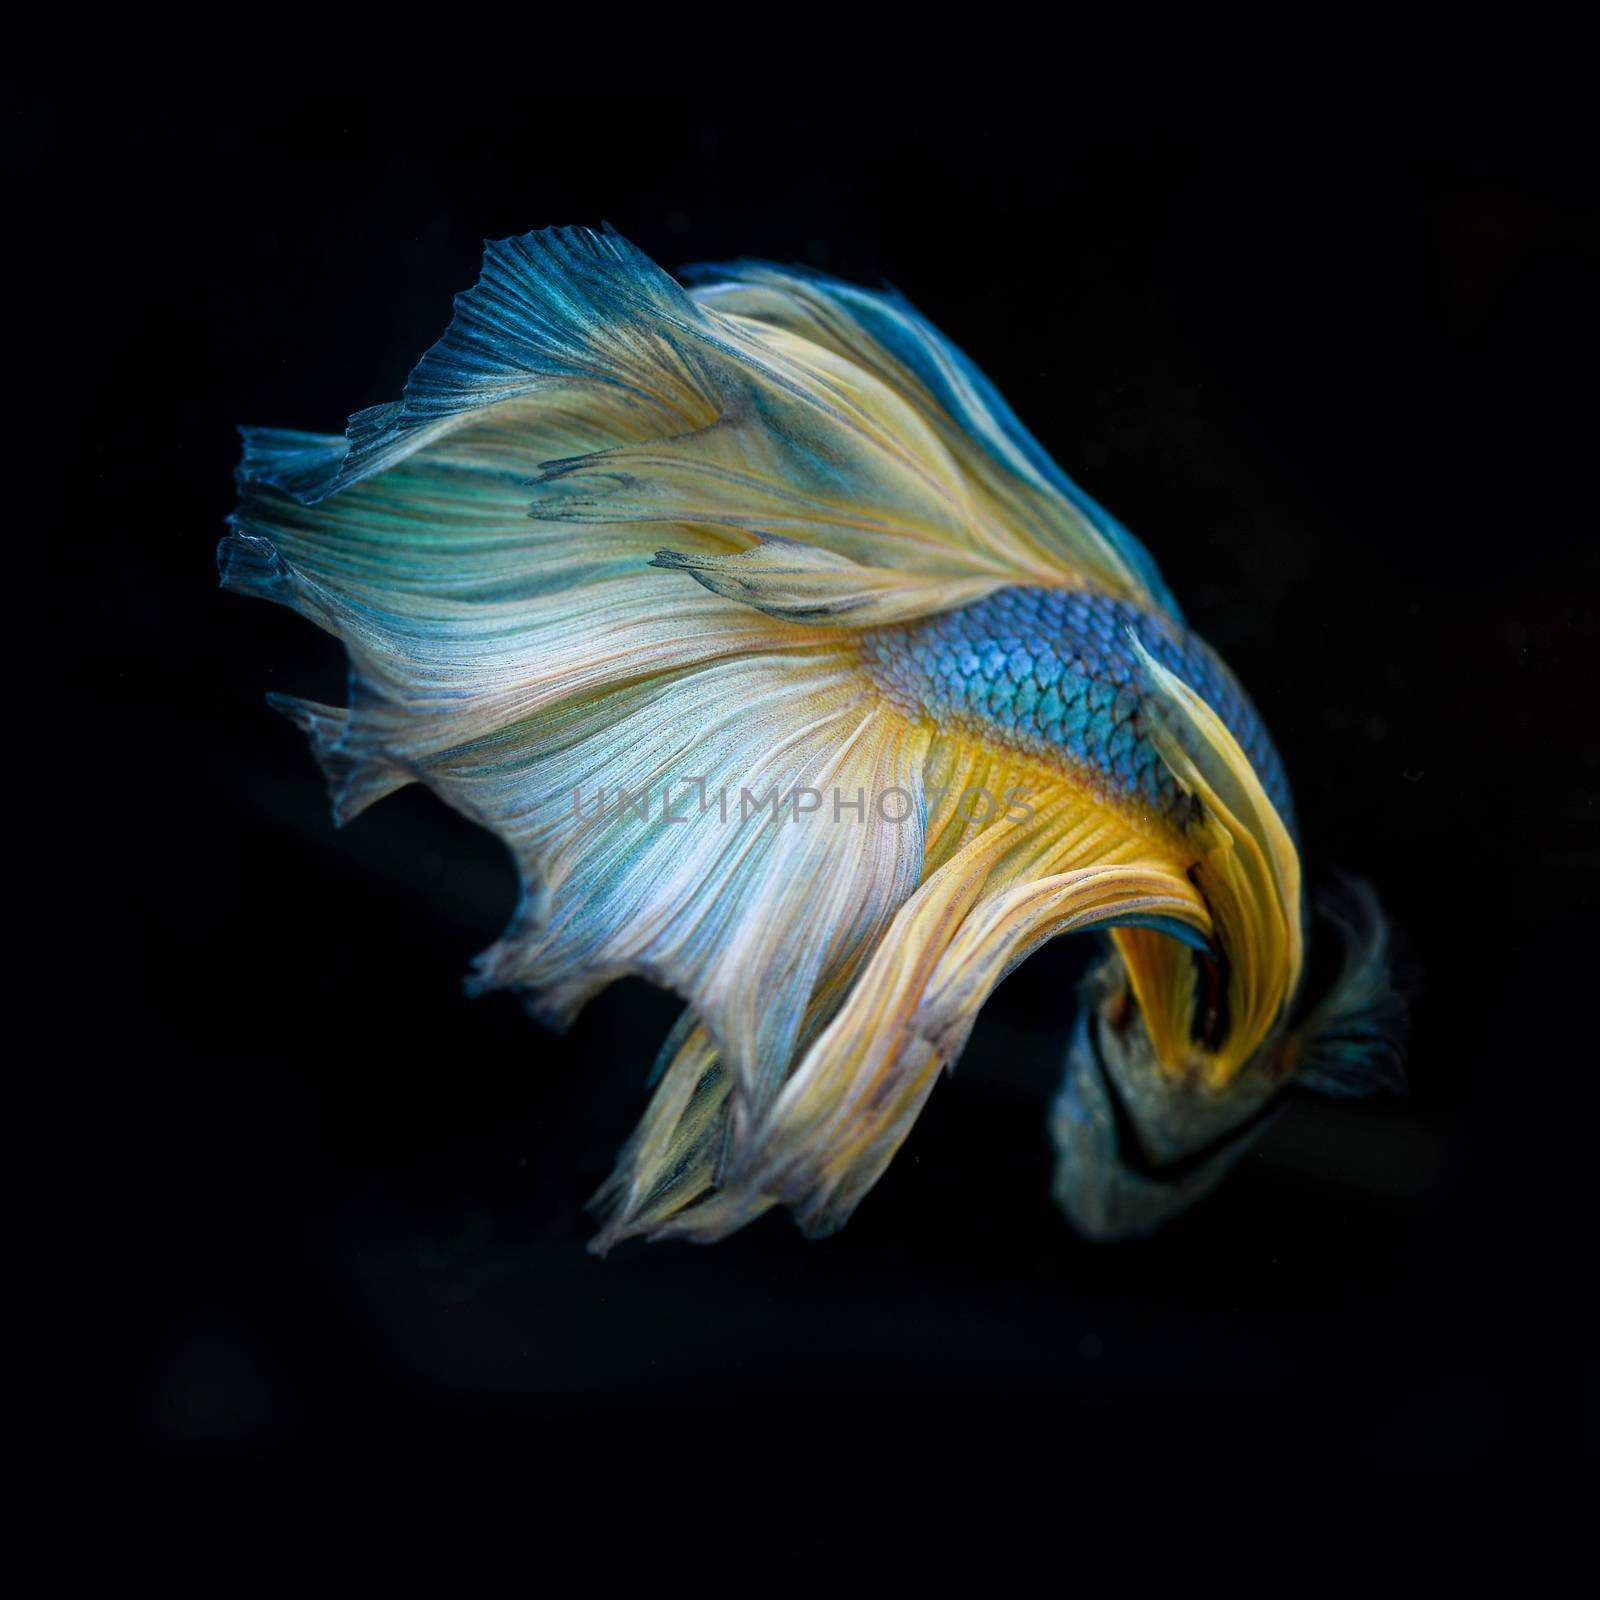 siamese fighting fish by antpkr